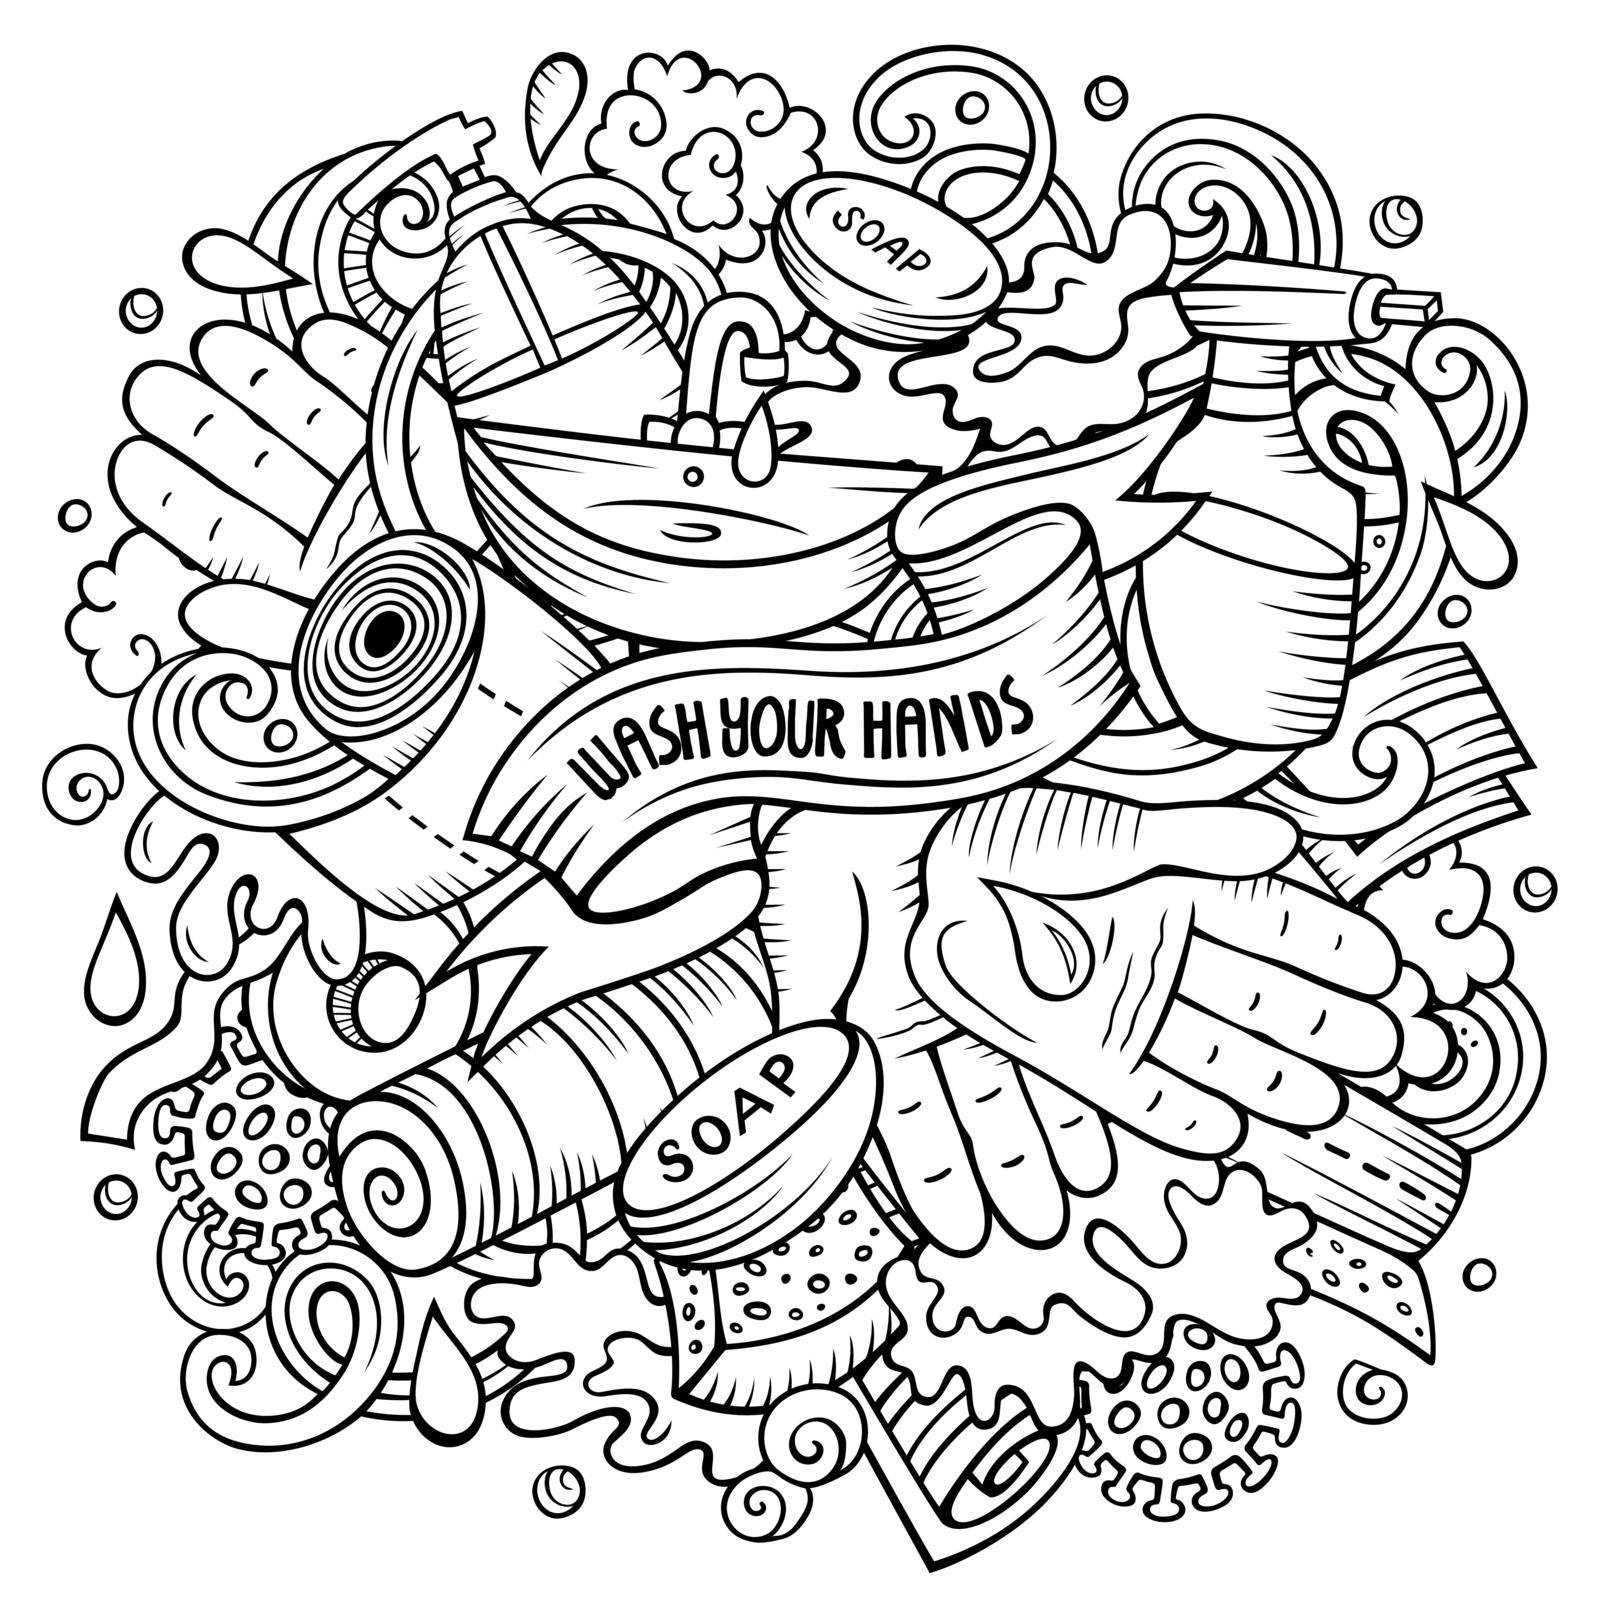 Cartoon vector doodles Wash Your Hands illustration. Sketchy, detailed, with lots of objects background. All objects separate. Line art epidemic picture